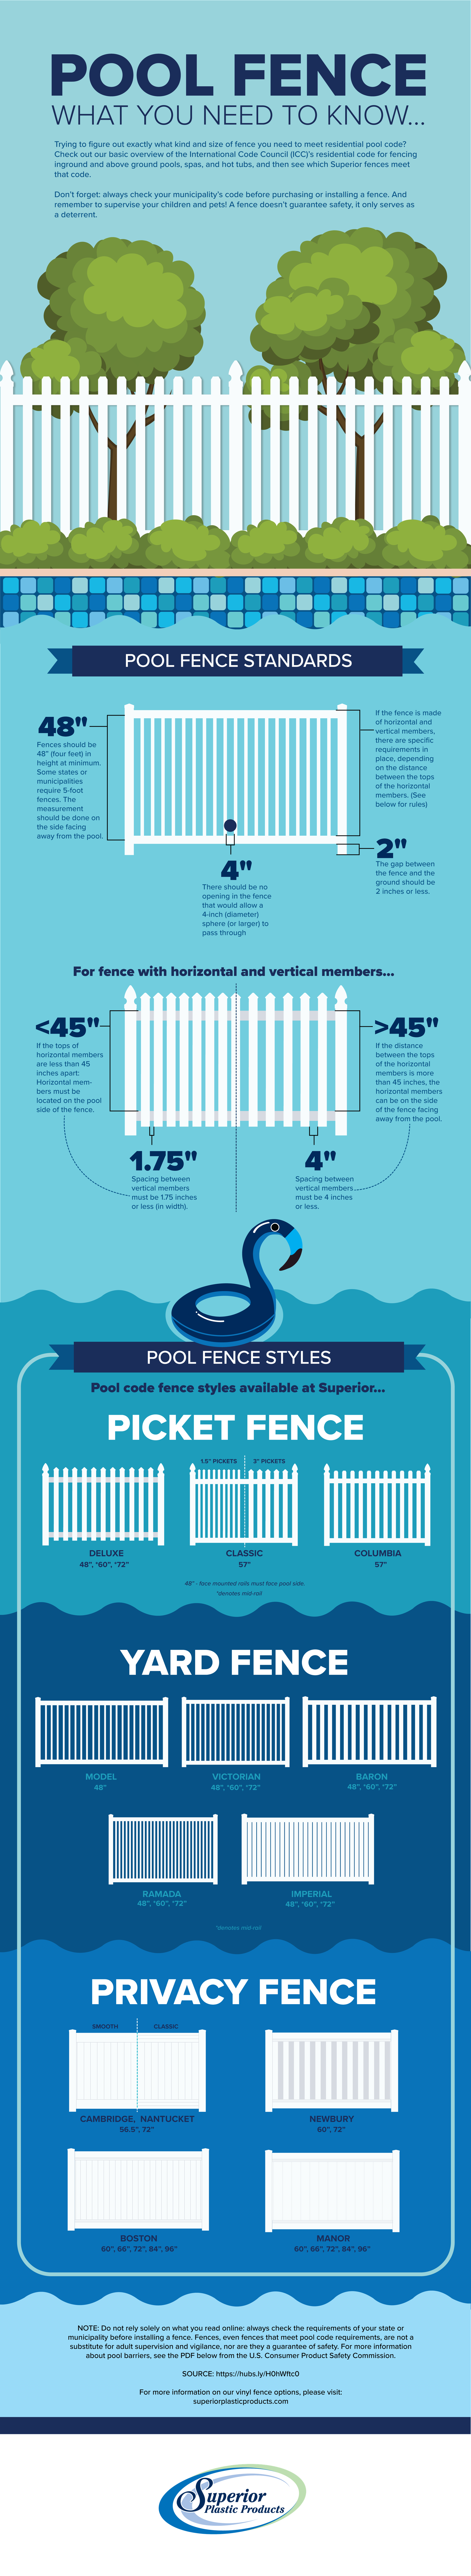 Pool Safety Code Infographic-01